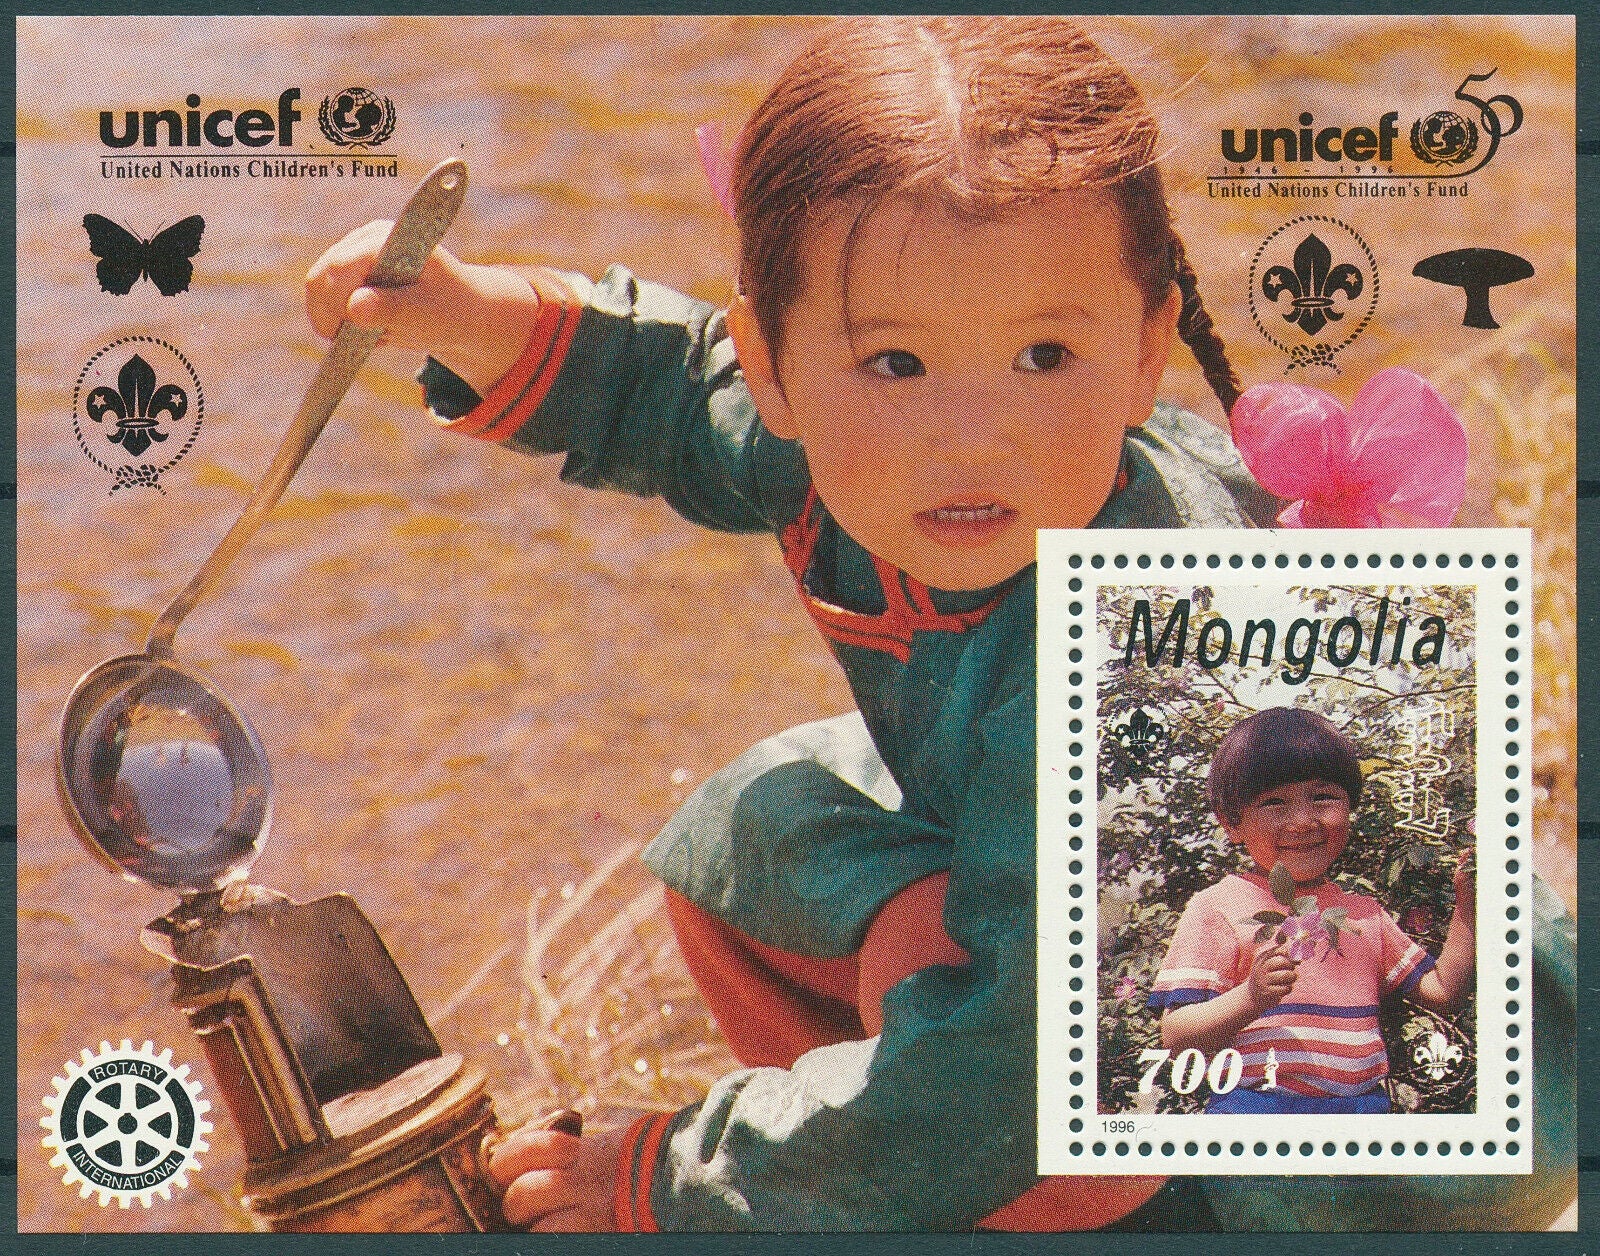 Mongolia 1996 MNH UNICEF Stamps UN United Nations Children's Fund 1v S/S